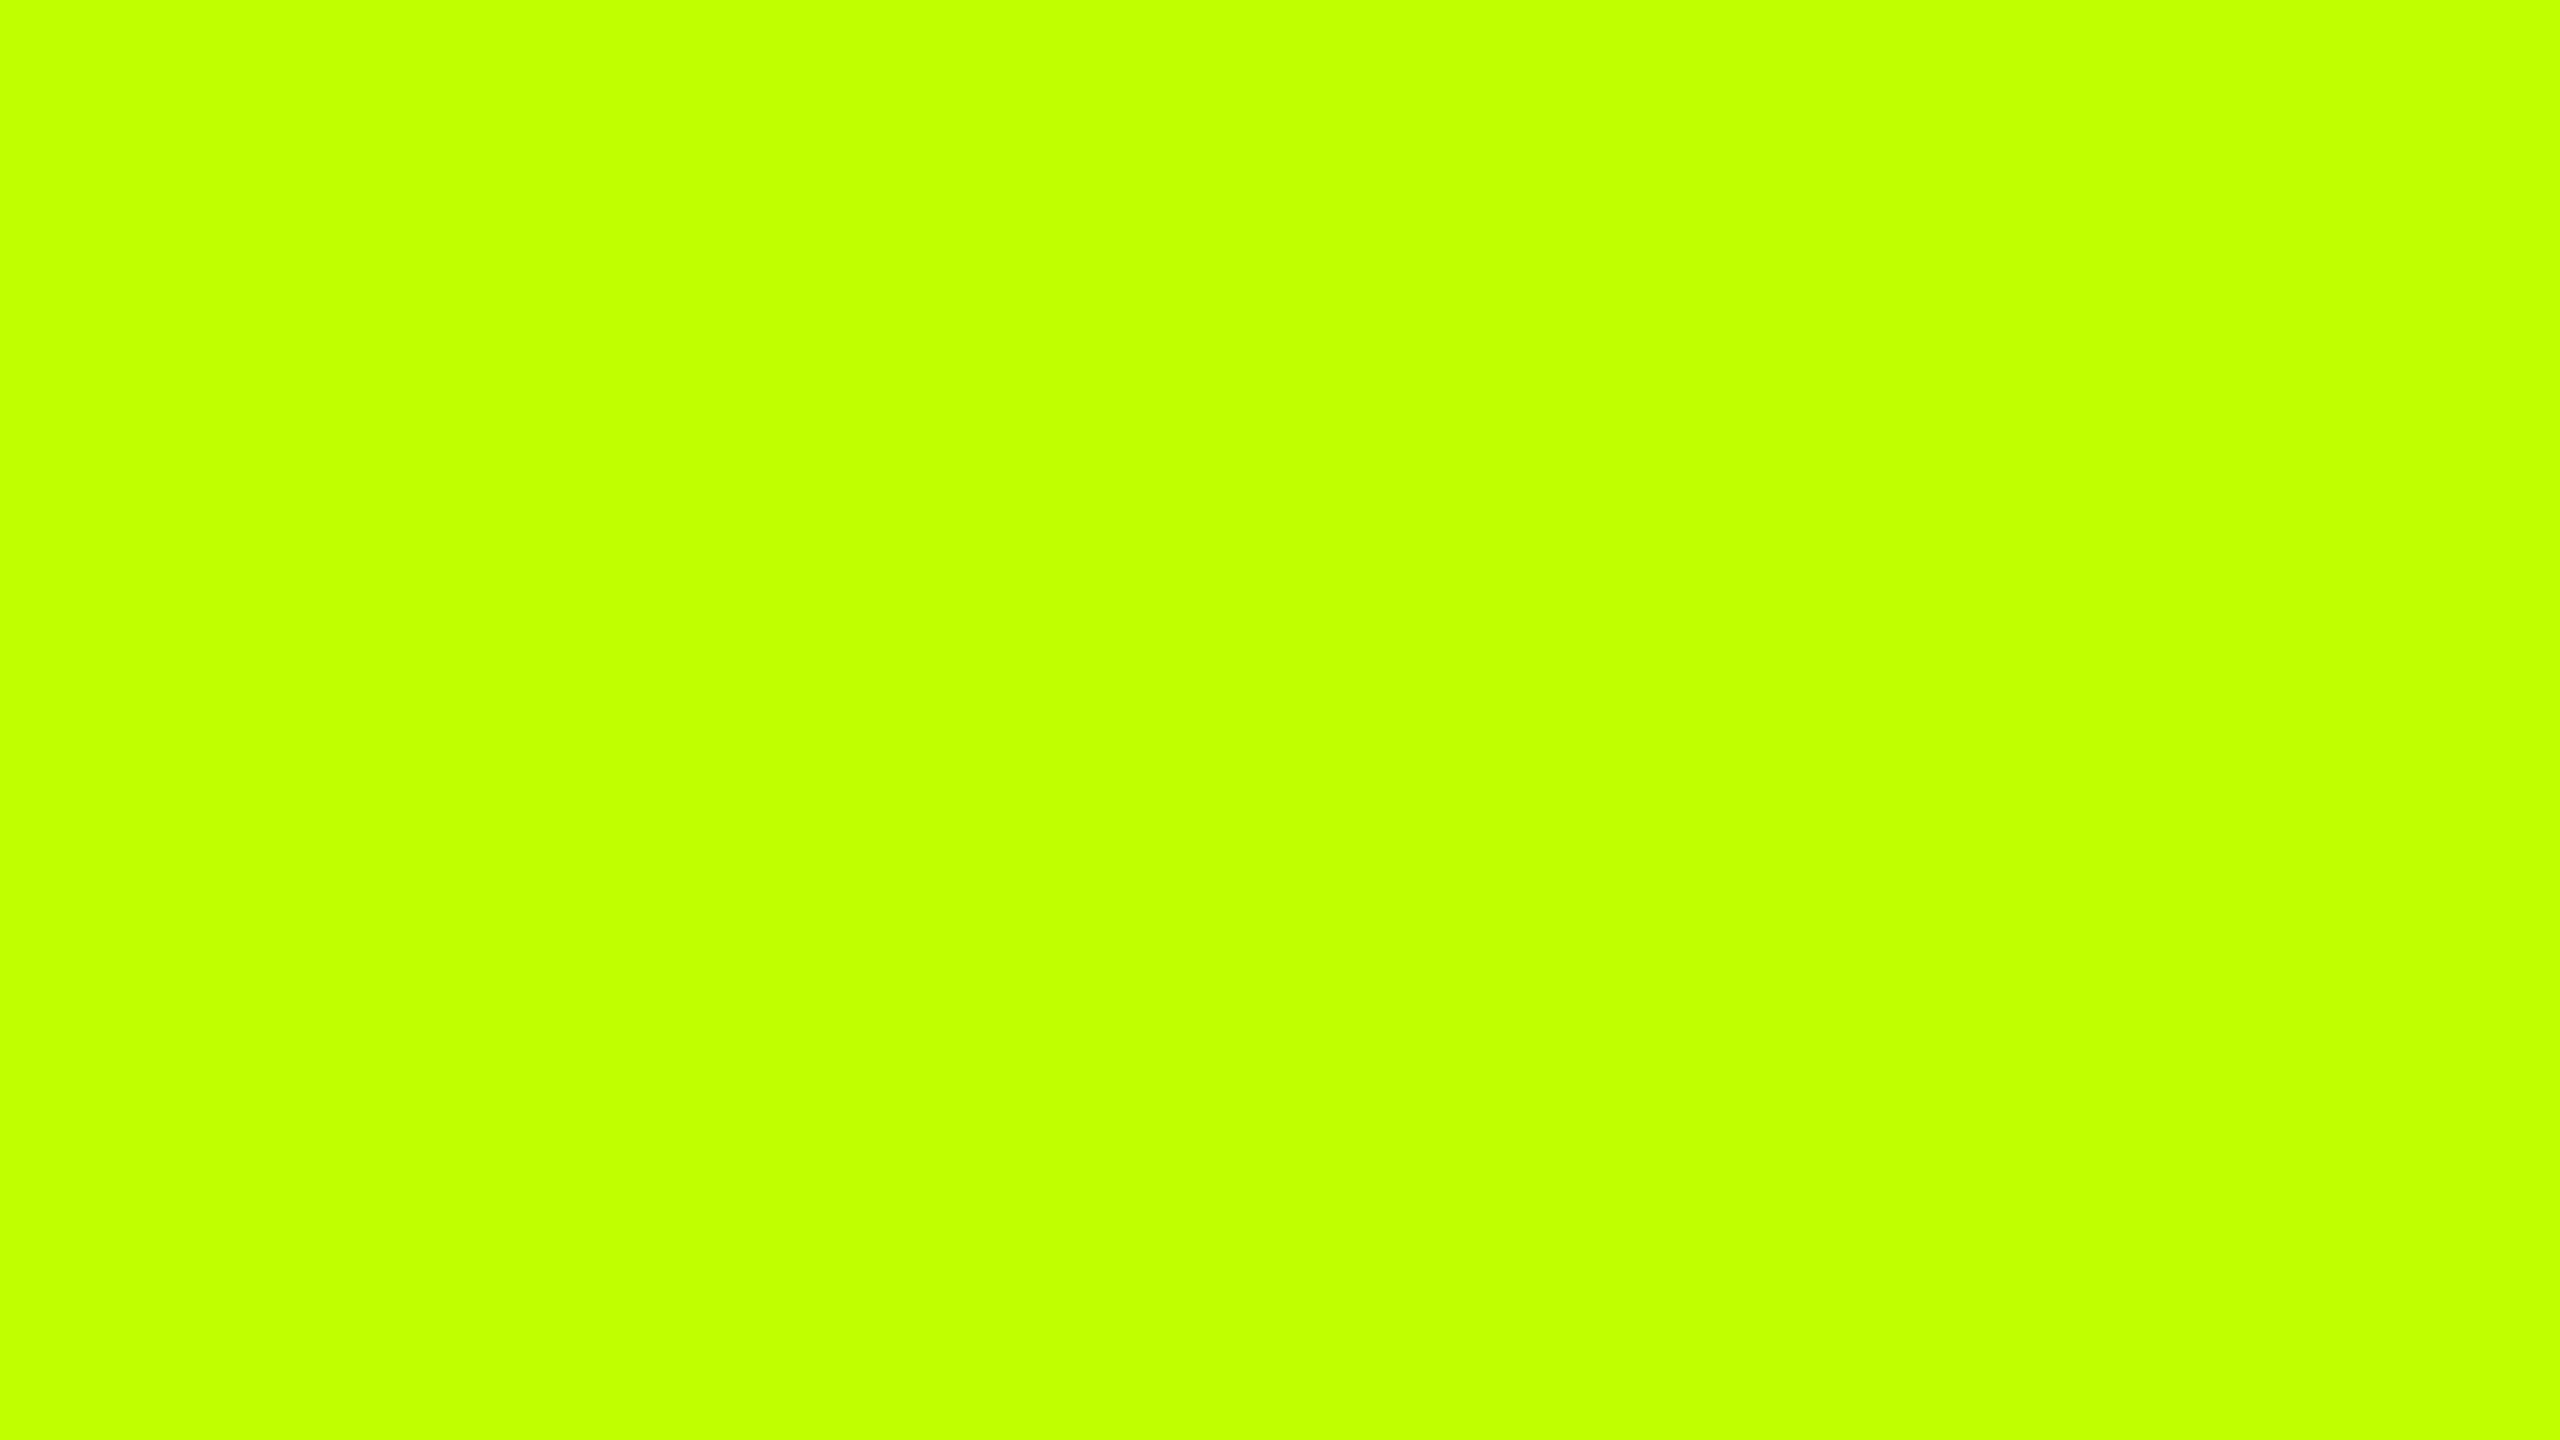 this Neon Green Desktop Wallpaper is easy Just save the wallpaper